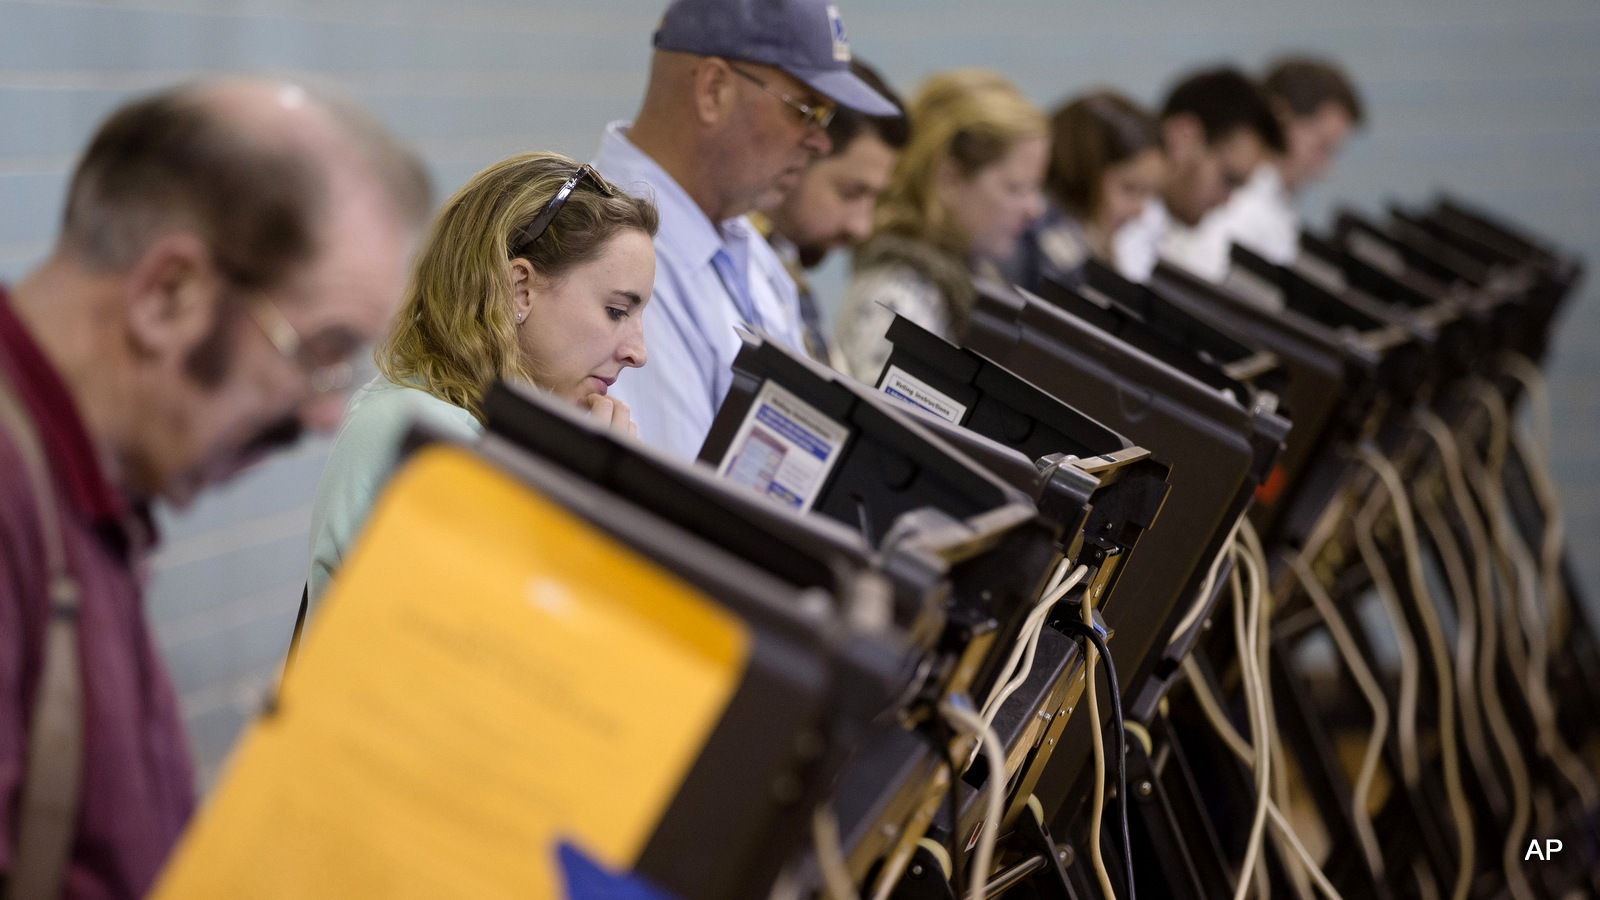 Voters use electronic voting machines at the Schiller Recreation Center polling station on election day, Tuesday, Nov. 3, 2015, in Columbus, Ohio.